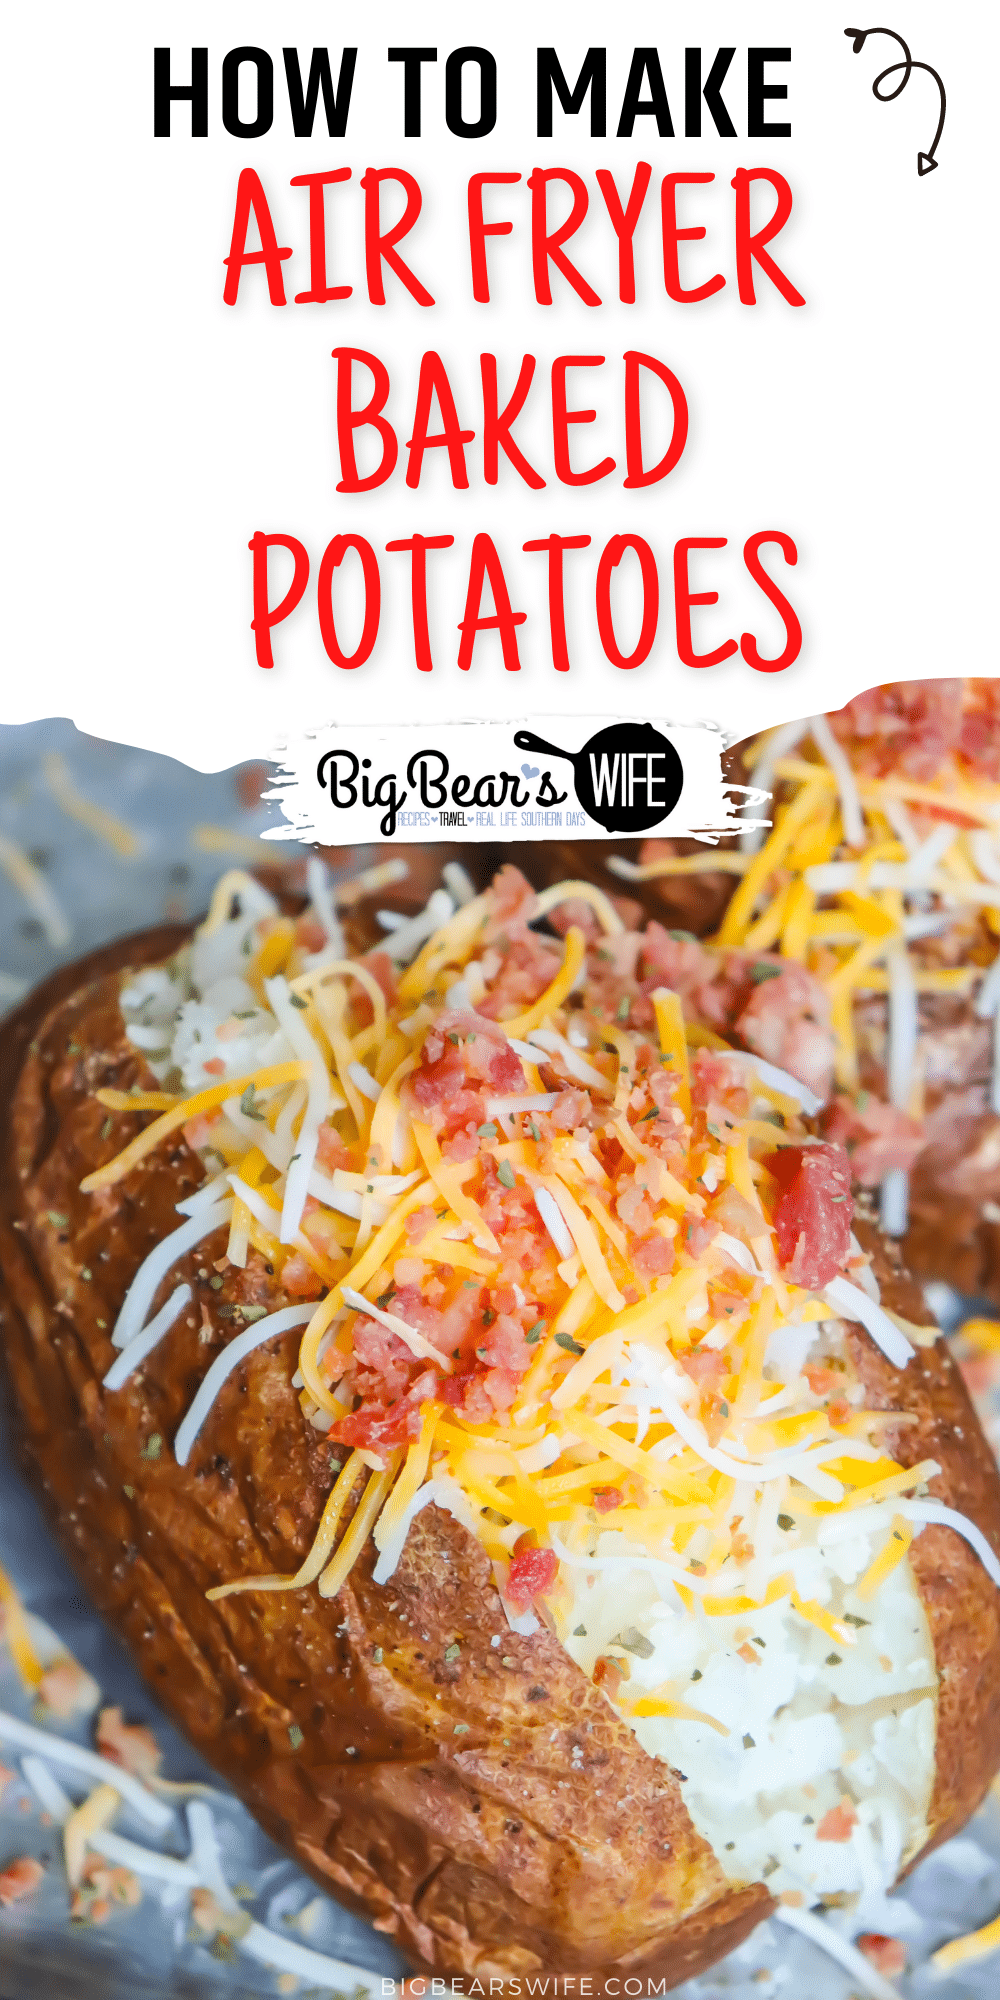 You're going to love these air fryer baked potatoes! The potato skins come out crisp but you still get that perfect fluffy baked potato center! Great with all of your favorite baked potato toppings like: butter, cheese, bacon or sour cream!  via @bigbearswife